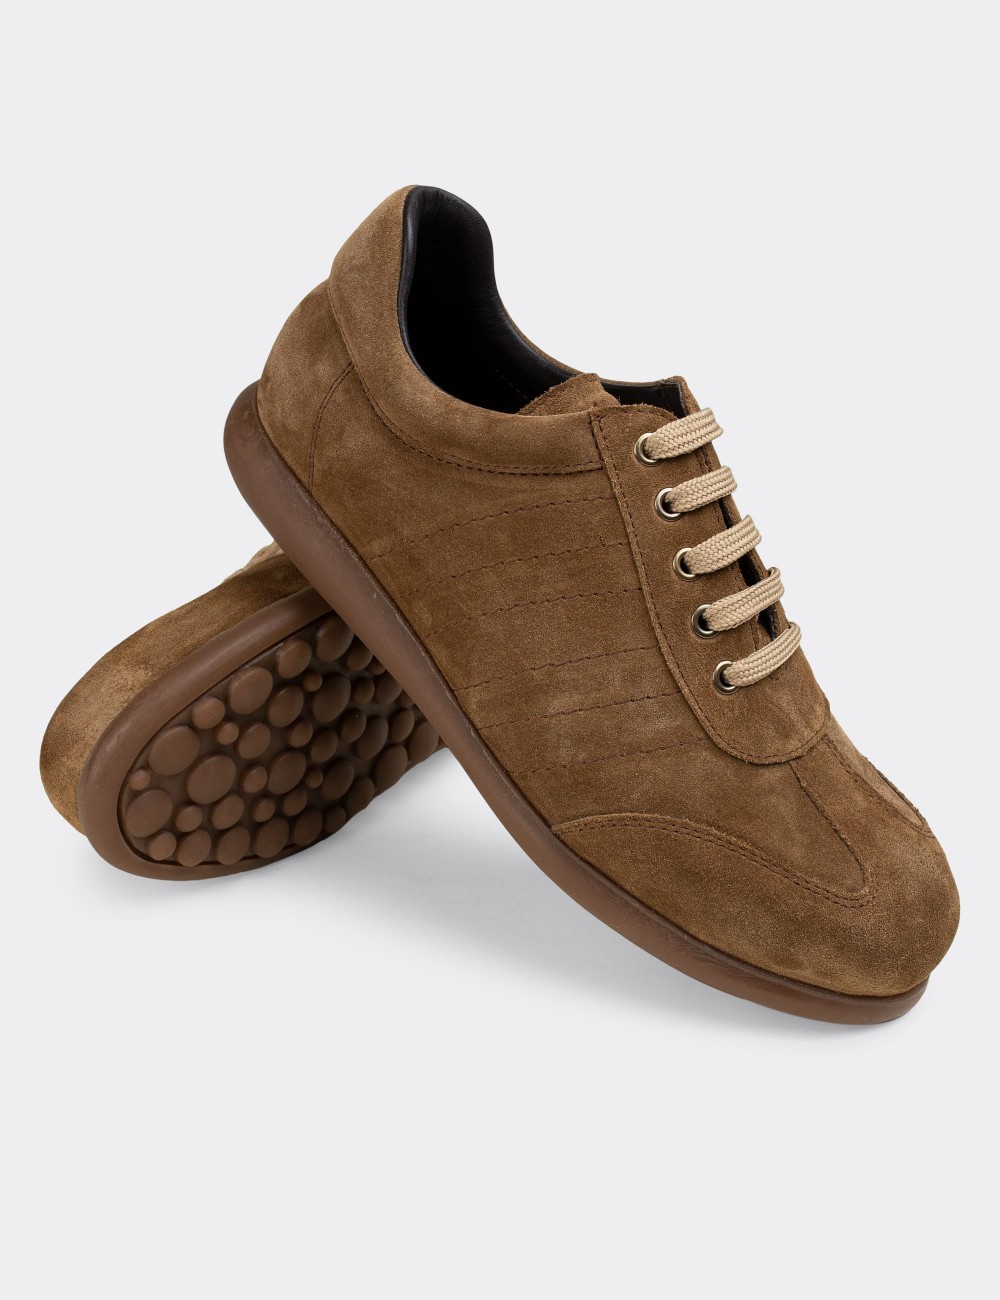 Tan Suede Leather Lace-up Shoes - 01826MTBAC04